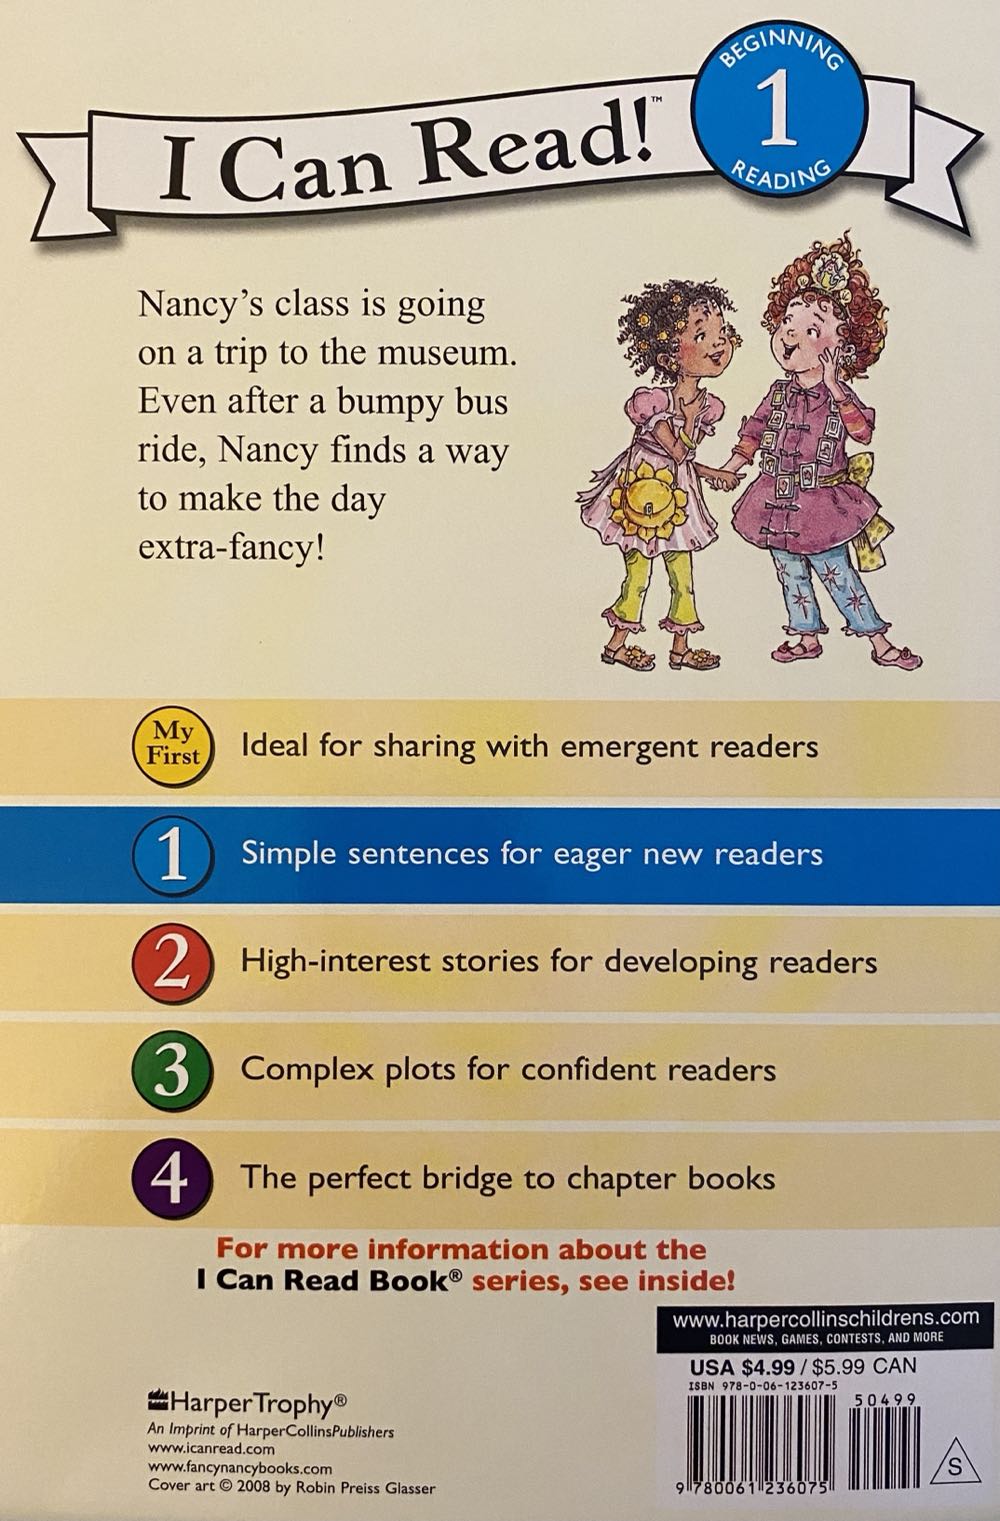 Fancy Nancy at the Museum - Jane O’Connor (Harper Collins - Paperback) book collectible [Barcode 9780061236075] - Main Image 2